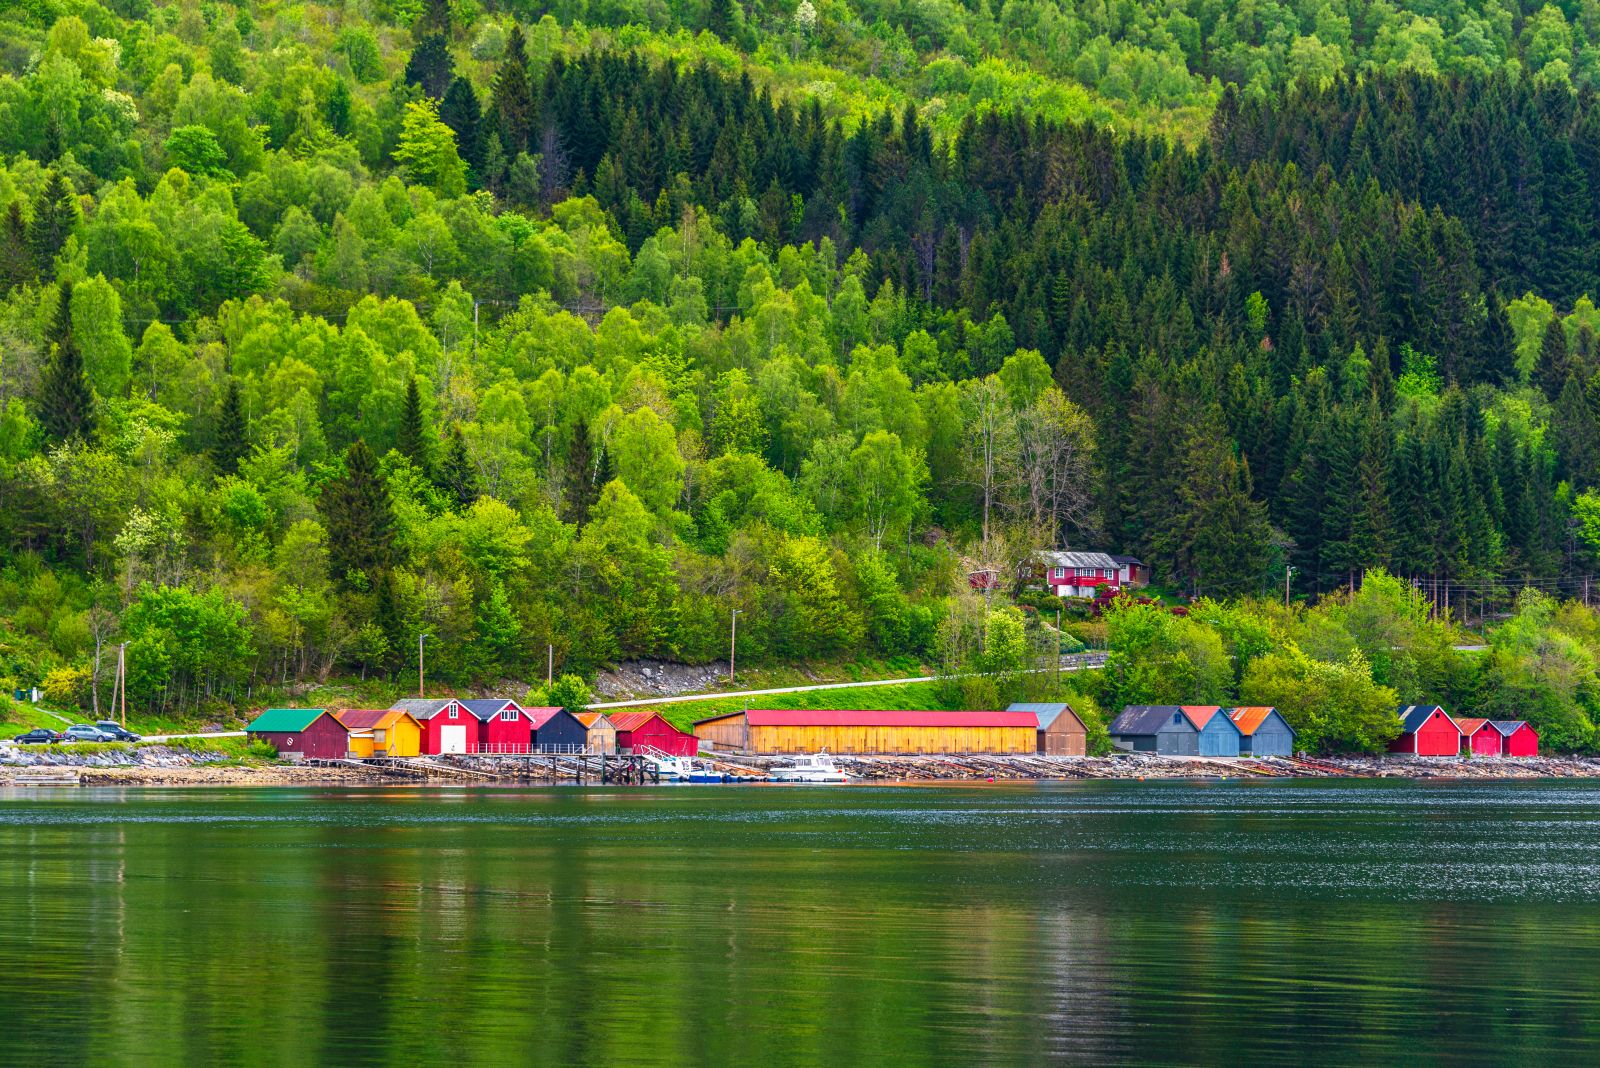 Colourful wooden huts against a backdrop of dense forest in Hjorundfjord Norway